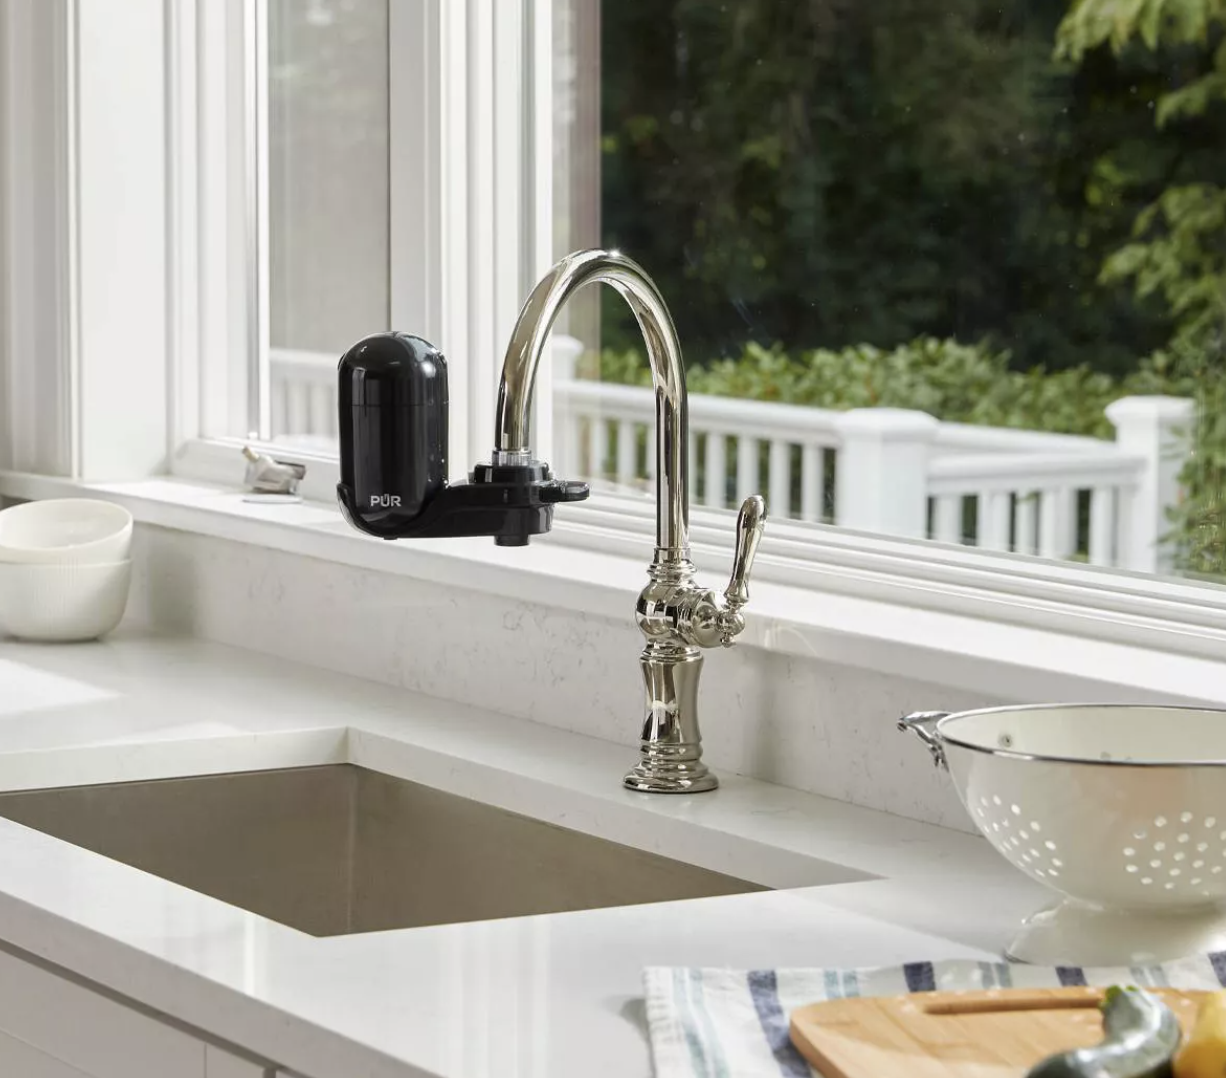 Black PUR water filtration system attached to silver sink faucet